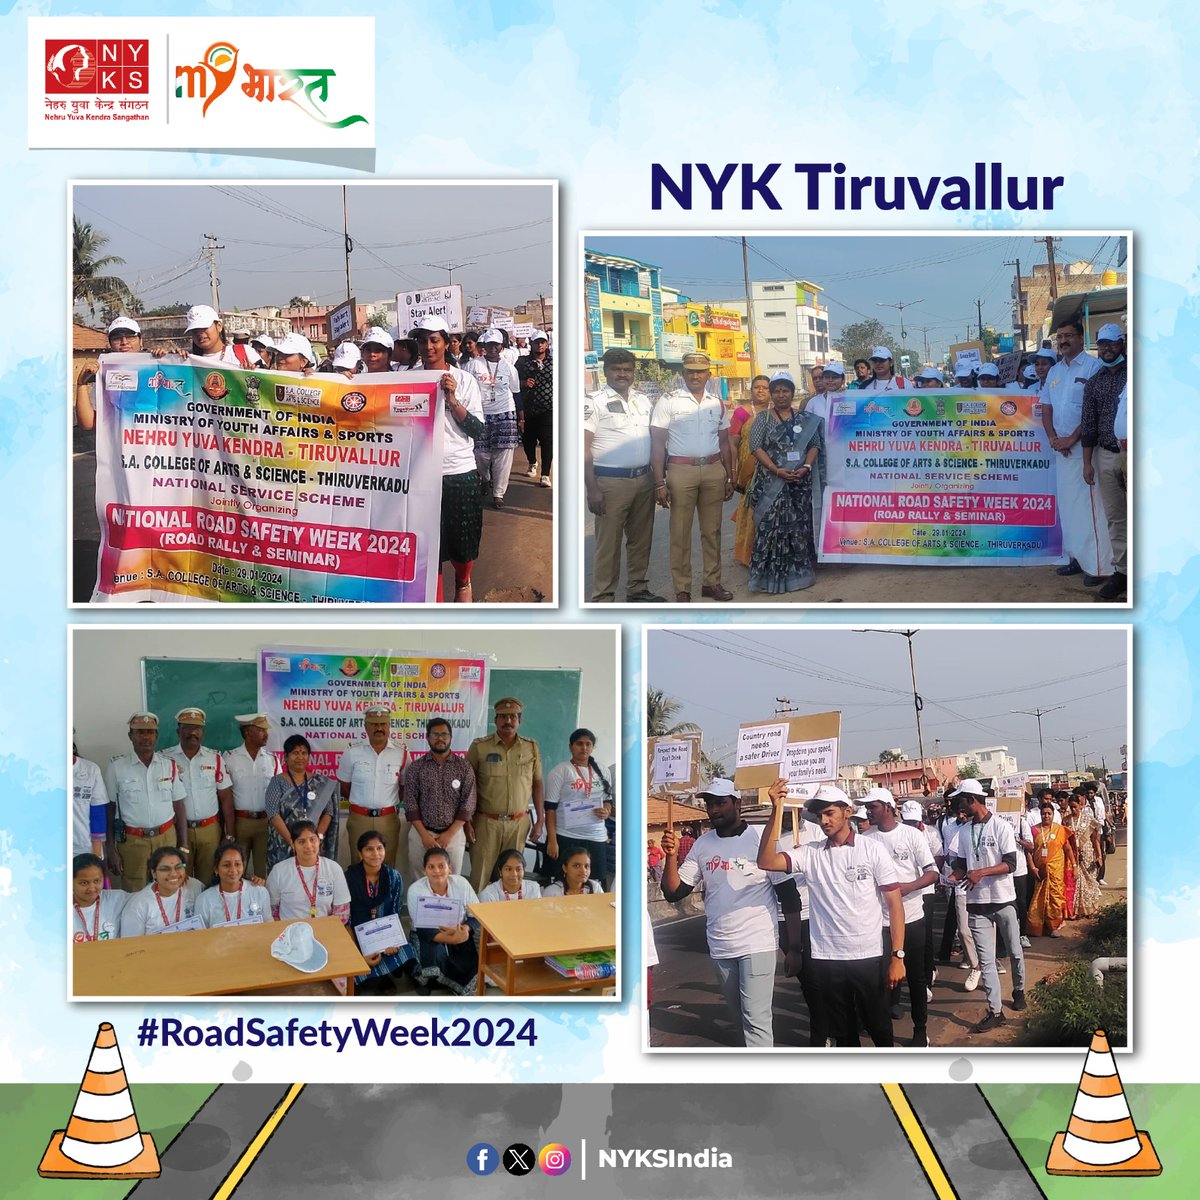 Revving up for safety! NYK Tiruvallur, in collaboration with the Traffic Police Department, organizes a Road Rally and Seminar at S. A. College of Arts & Science, Thiruverkadu, as part of #RoadSafetyWeek2024. 🛣️🚗 #RoadSafety #NYKS #MYBharat #TamilNadu